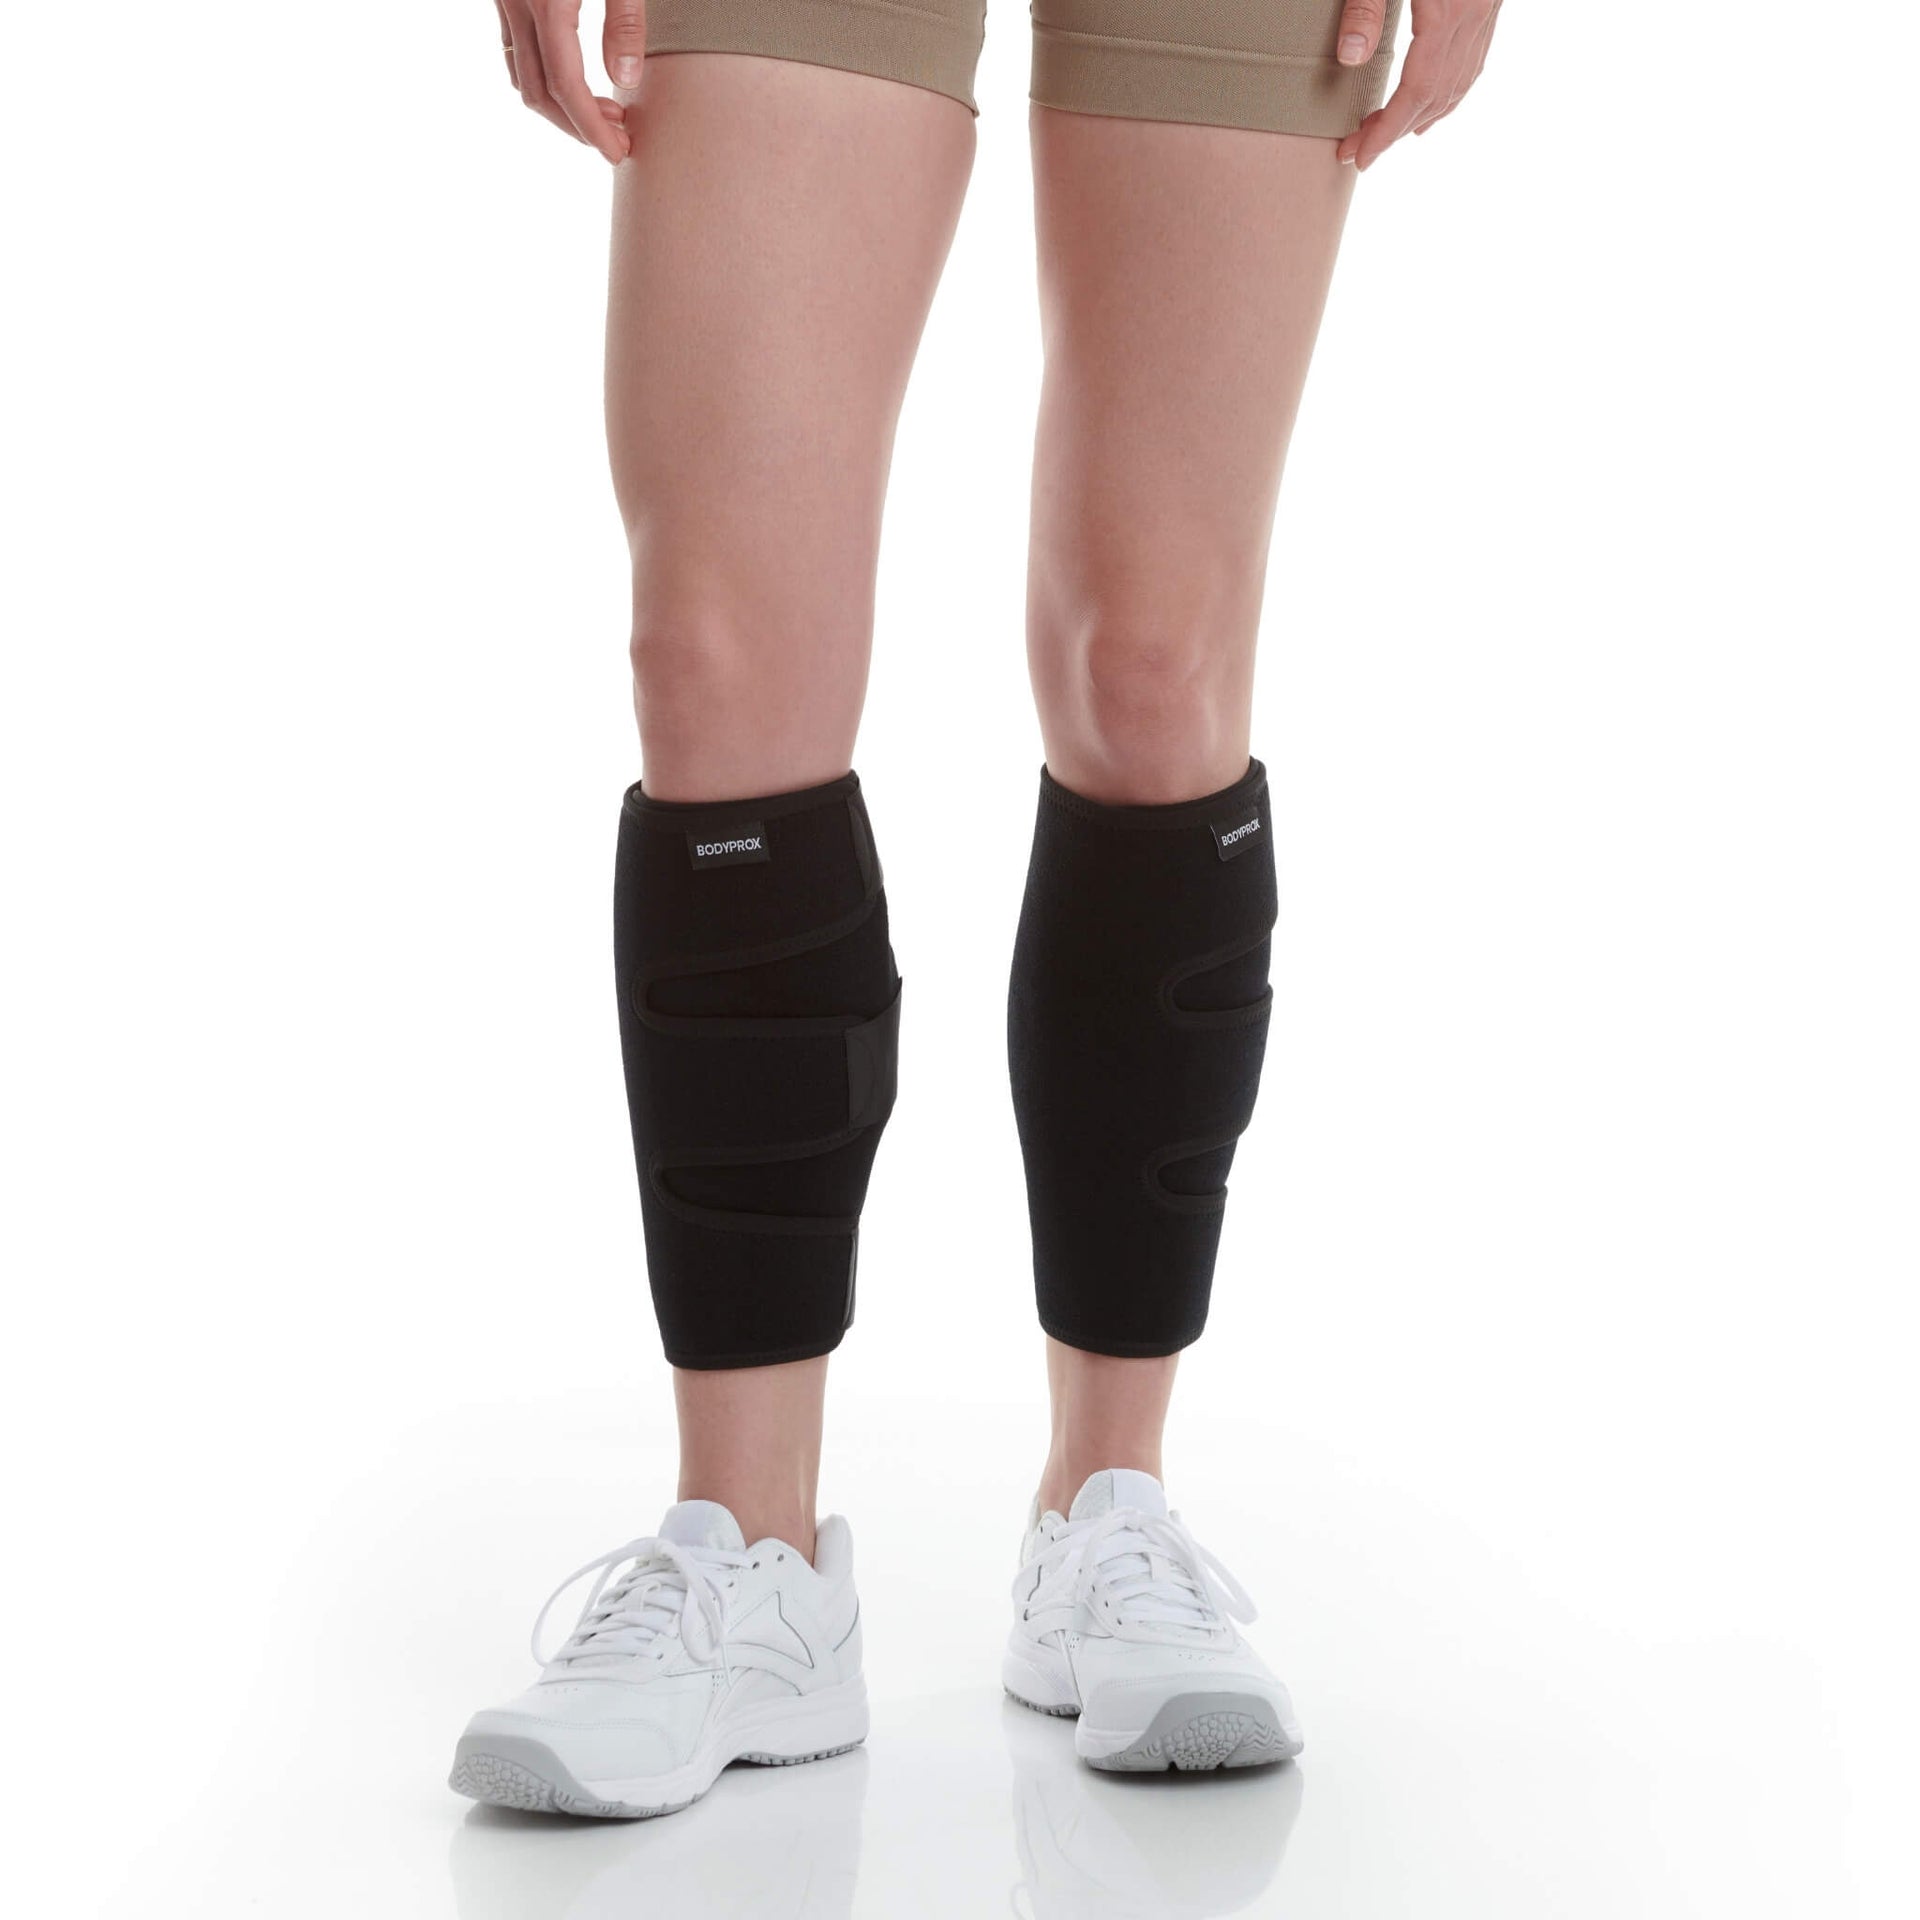 Calf Compression Sleeve Shin Splint Guards Relief Reduce Swelling Pain –  Brace Professionals